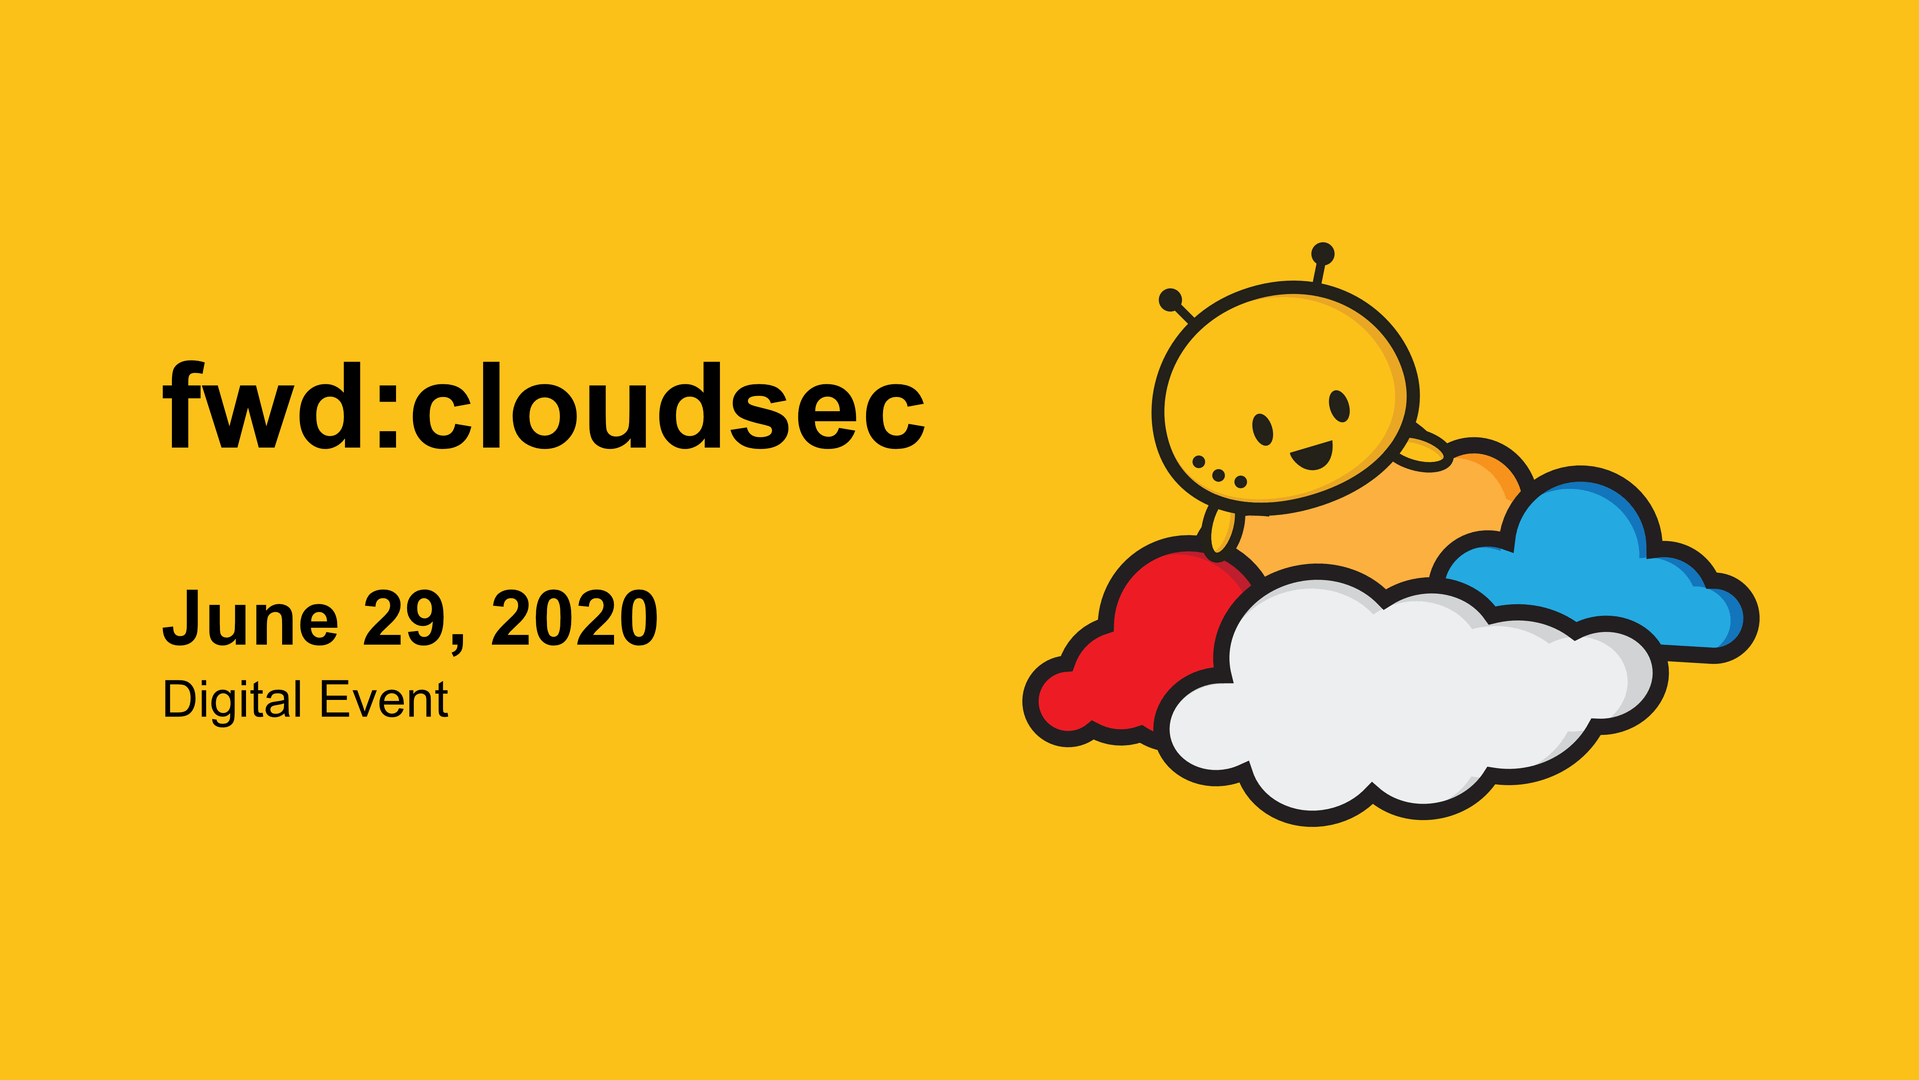 Join us at fwd:cloudsec, a brand-new virtual security conference! Turbot is proud to be a Platinum sponsor for this non-profit security event taking place June 29, 2020.